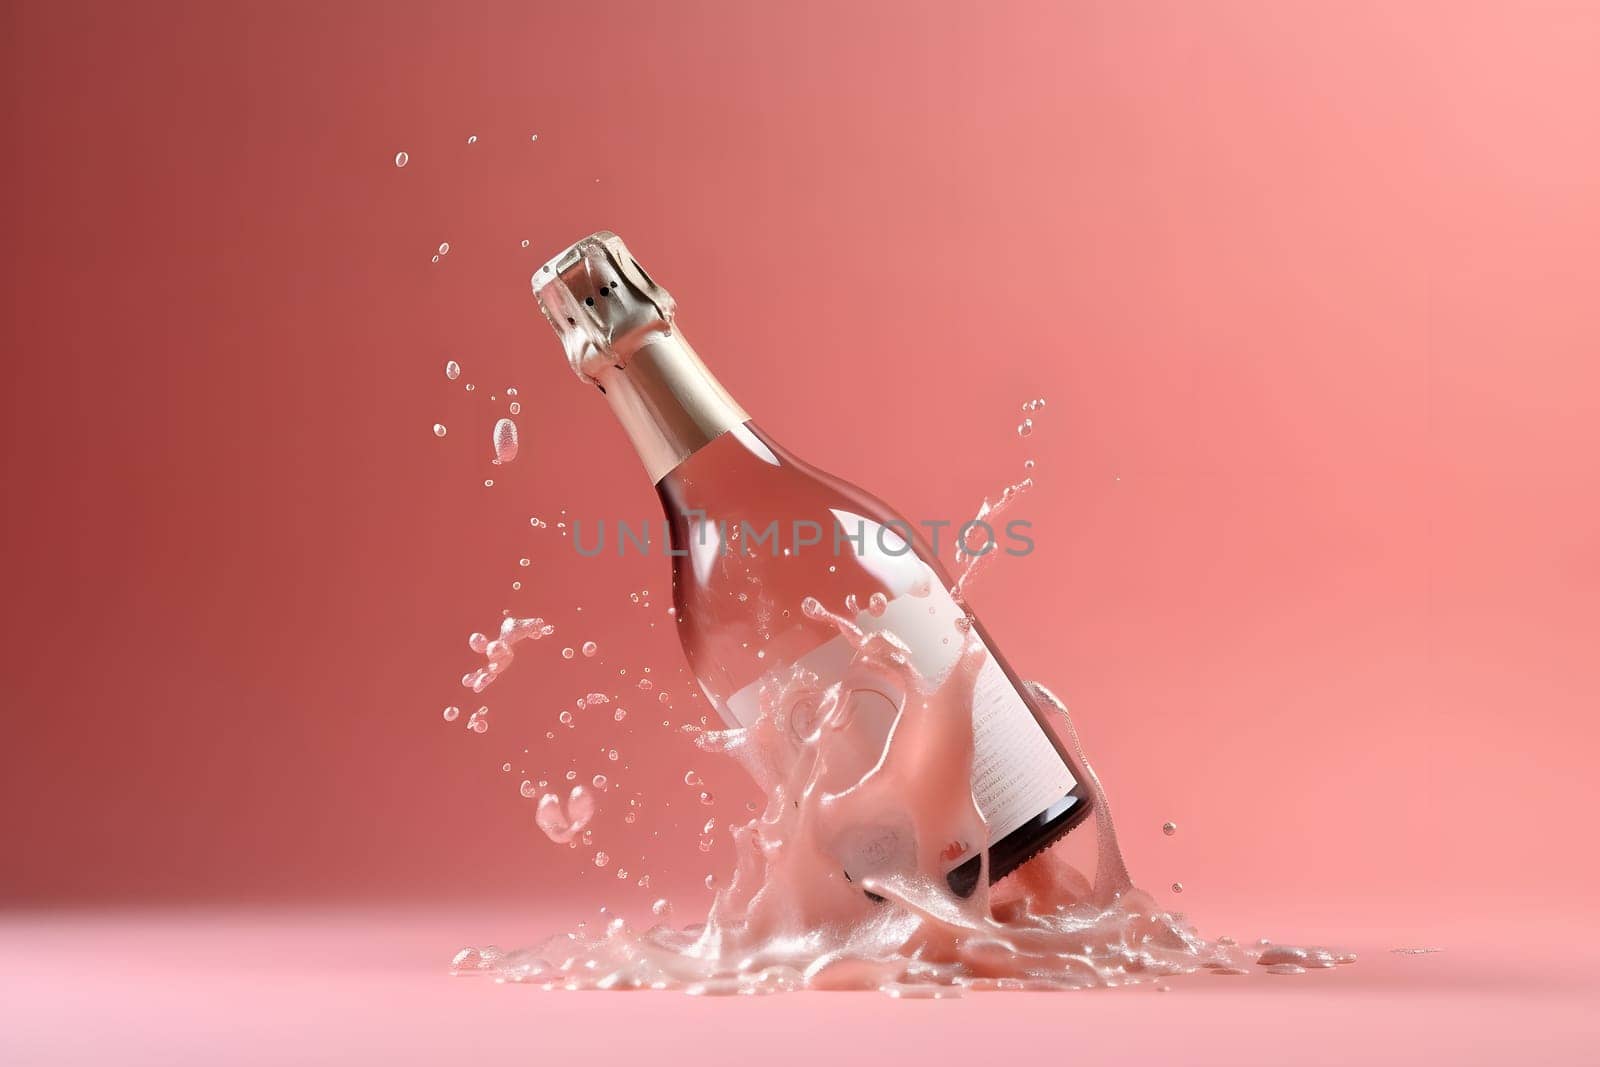 unopened bottle of champagne with splashes on pink background. Neural network generated in May 2023. Not based on any actual scene or pattern.